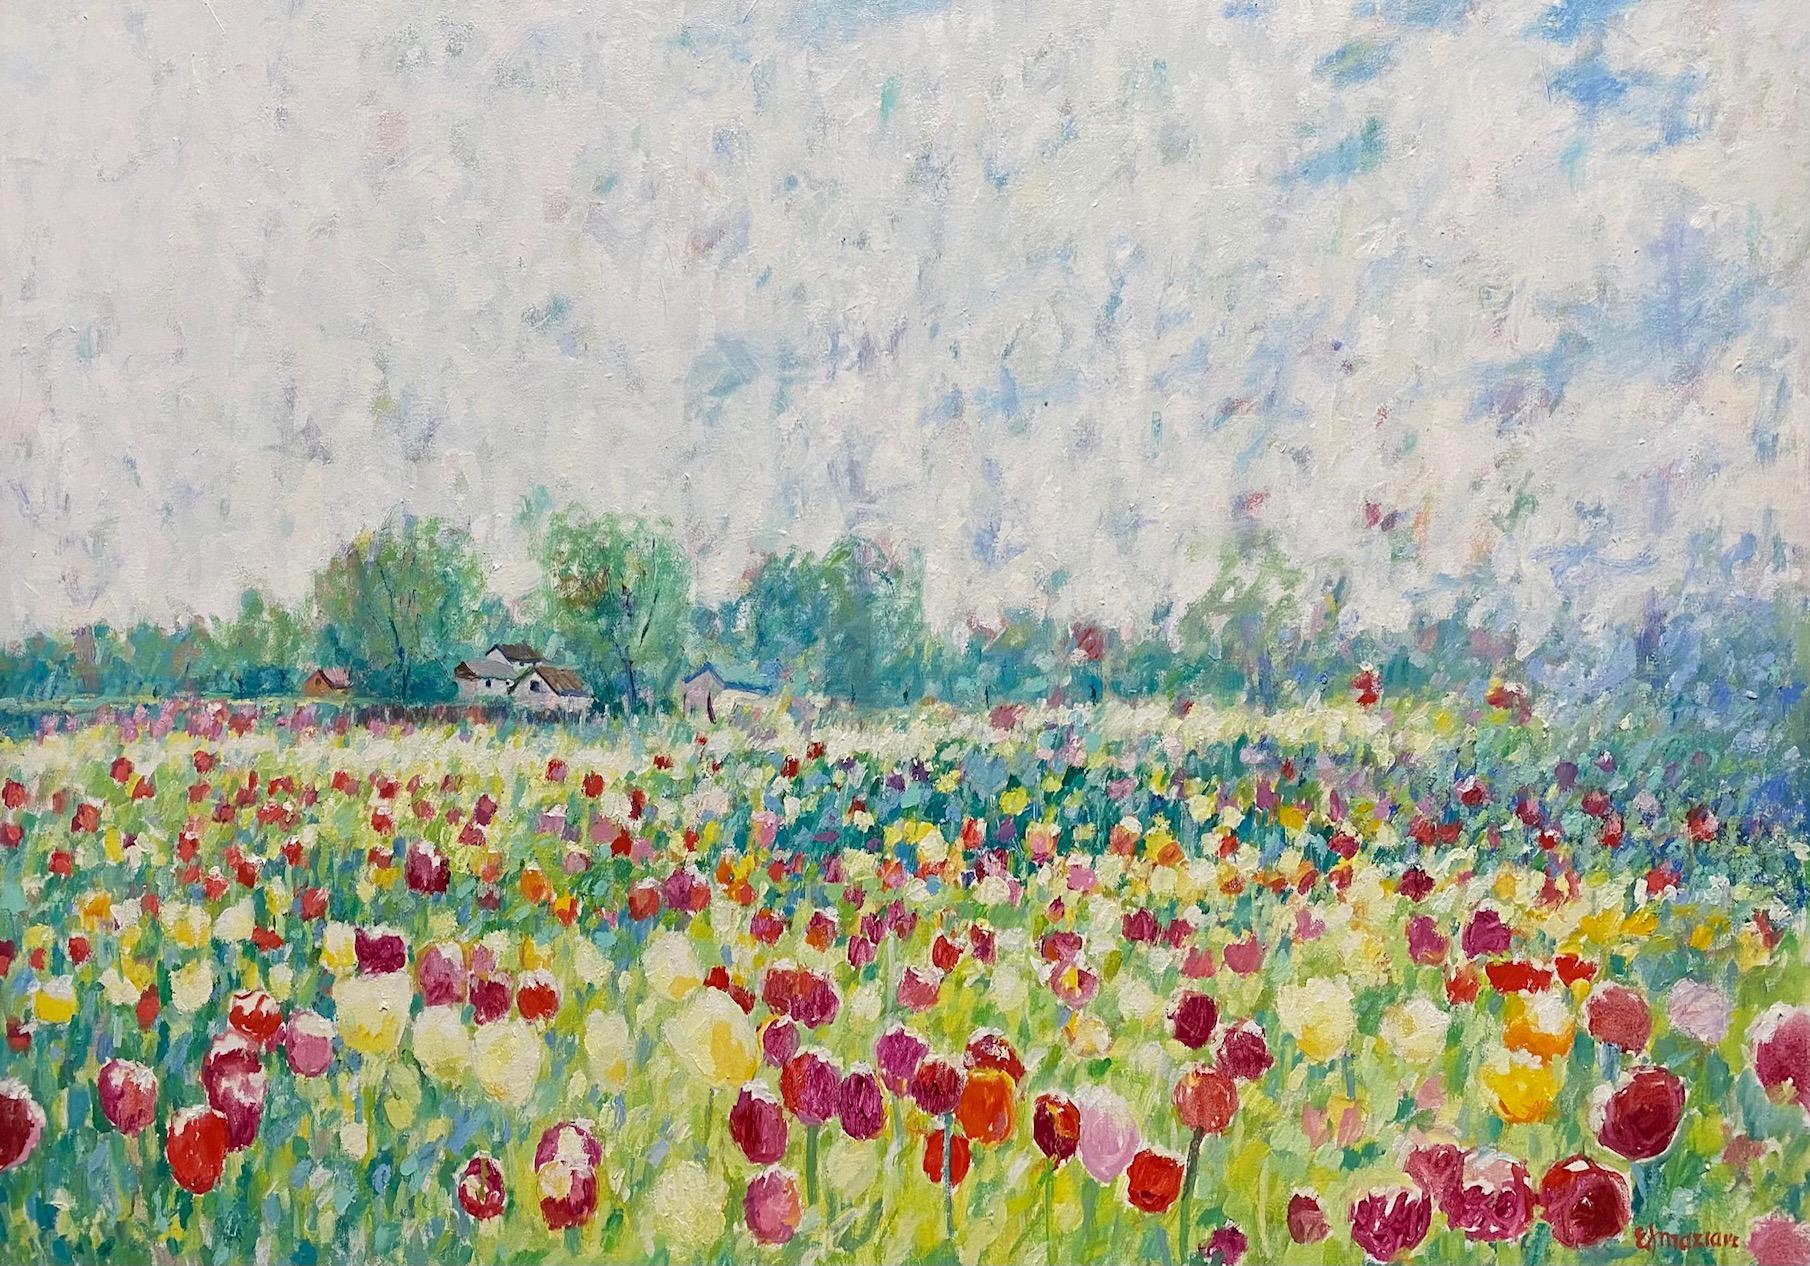 Tulips and Clouds, original 30x40 impressionist floral landscape - Impressionist Painting by Eugene Maziarz